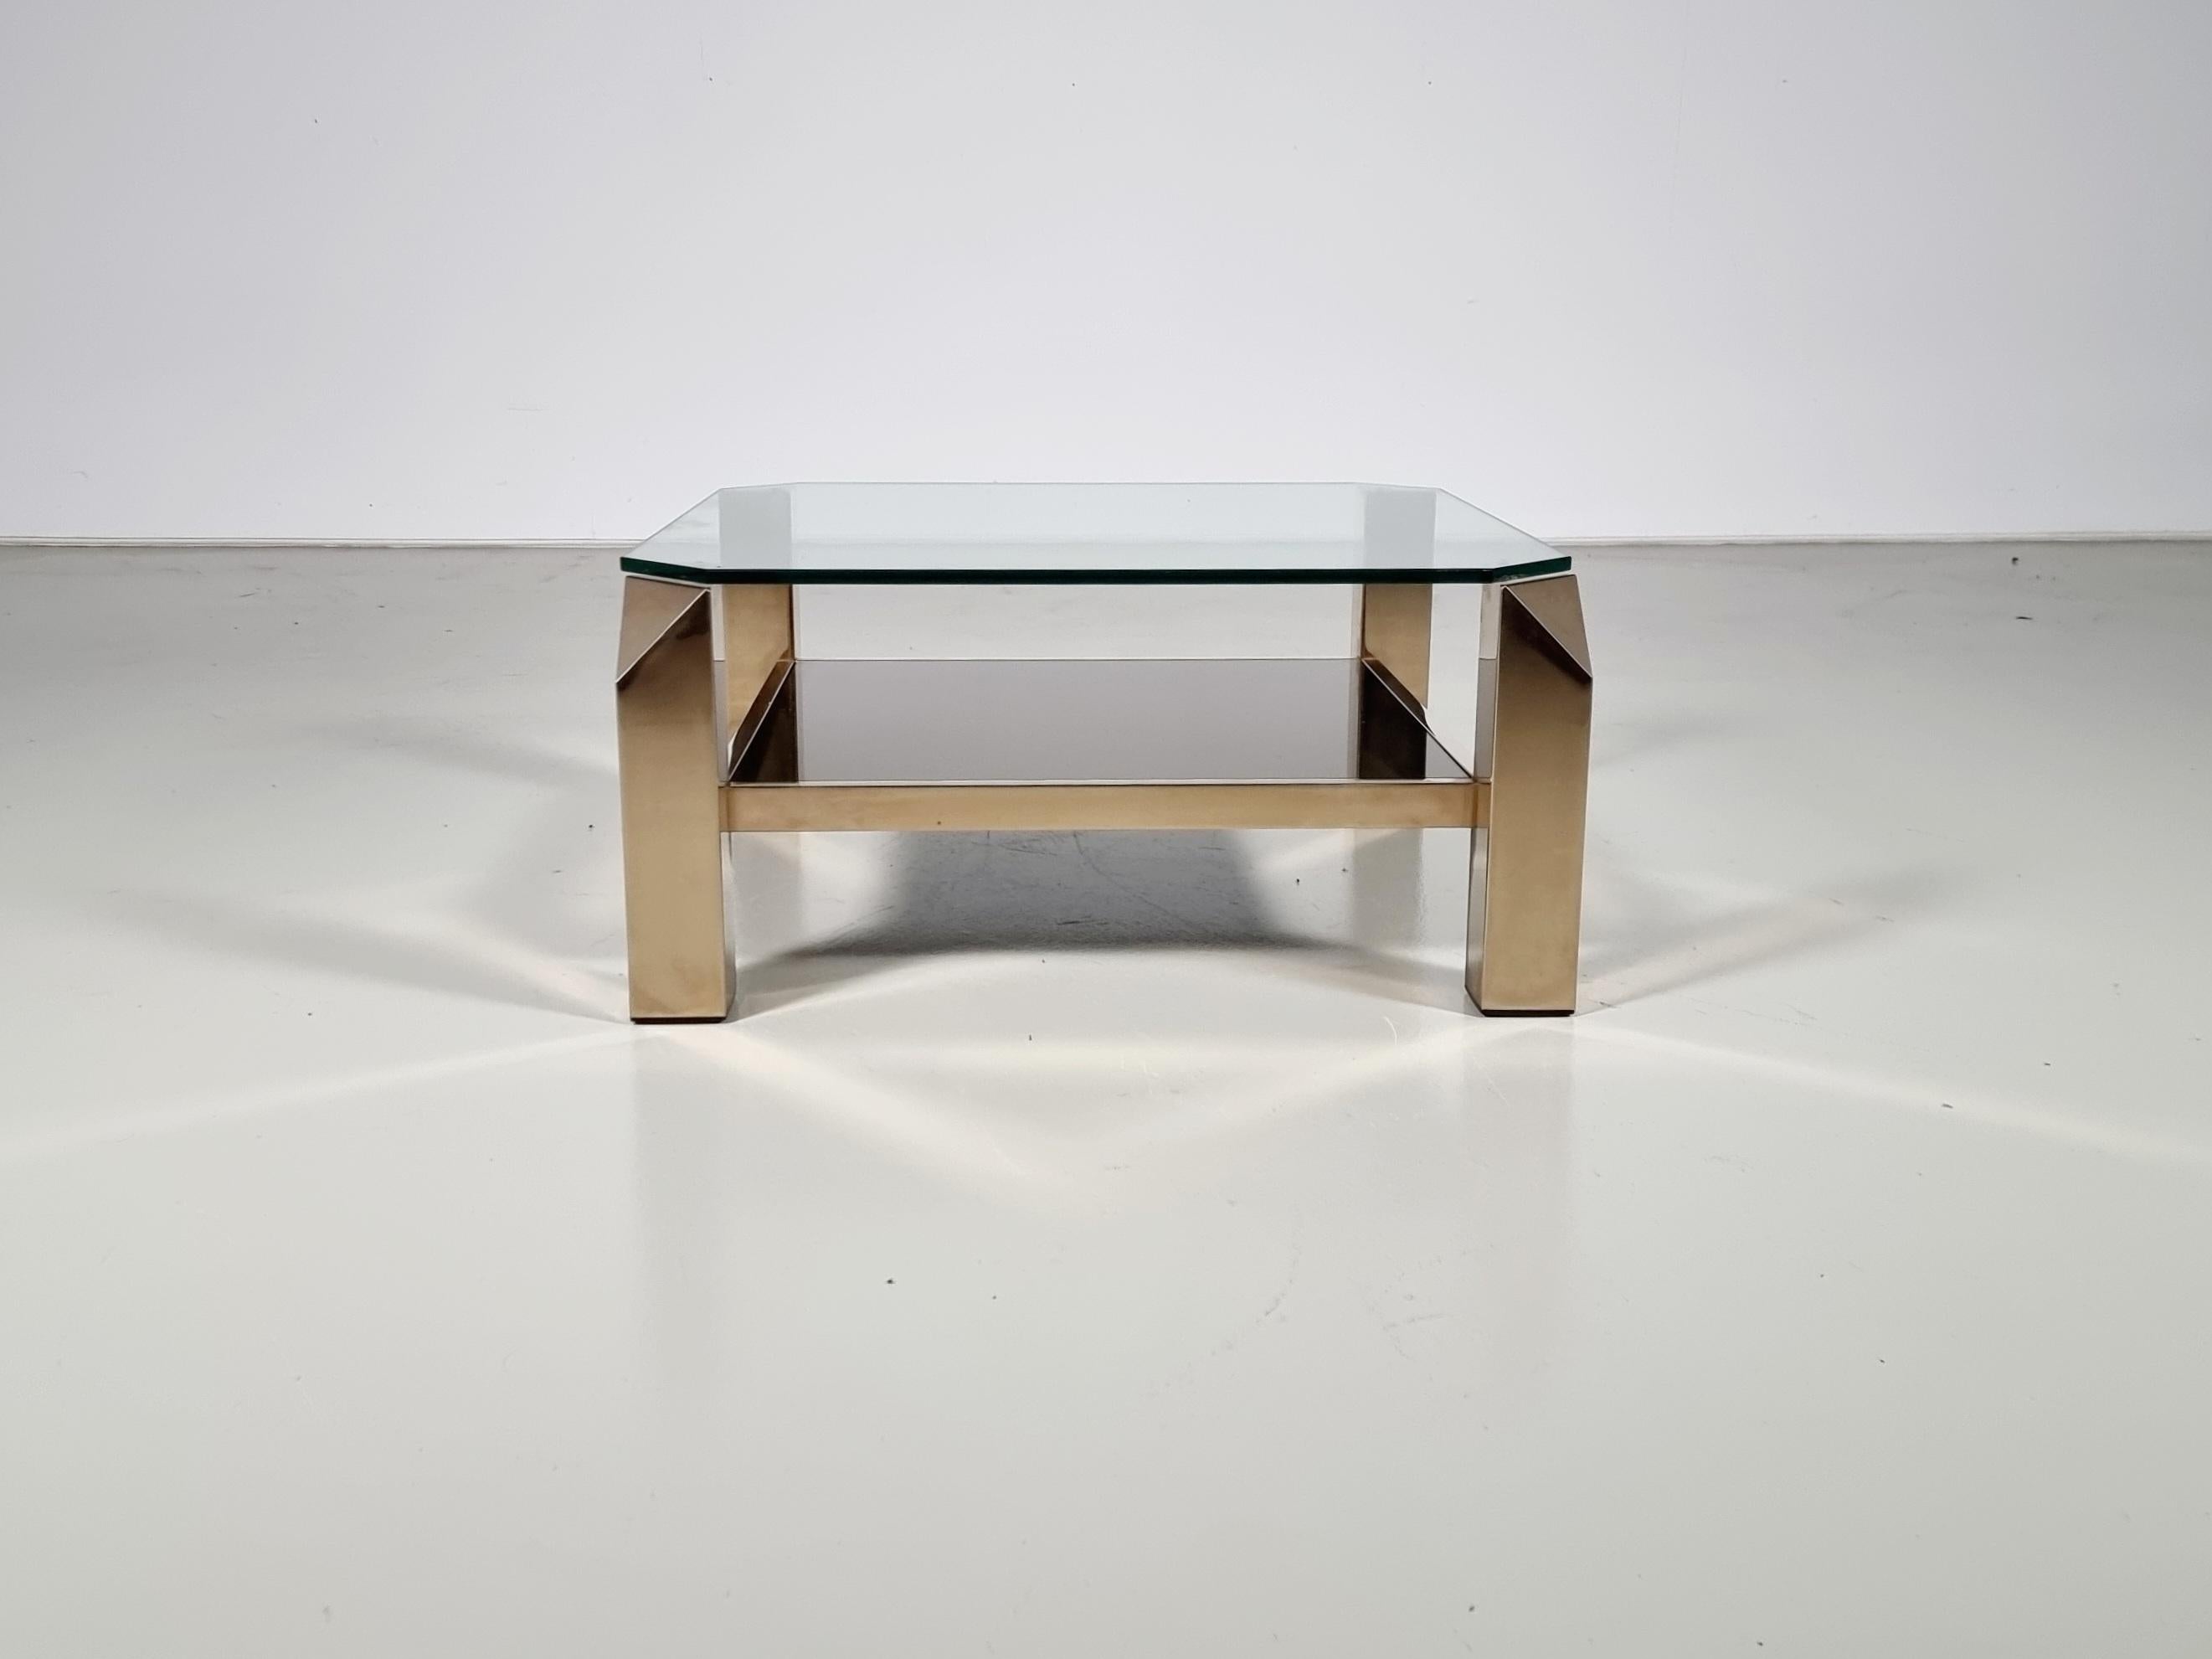 23-karat gold plated cocktail table in eye-catching geometric style, manufactured by Belgo Chrom in Belgium around 1970.

It is made of high-quality brass with a gold-plated finish. The finish to the square shapes of the base is really nice, with